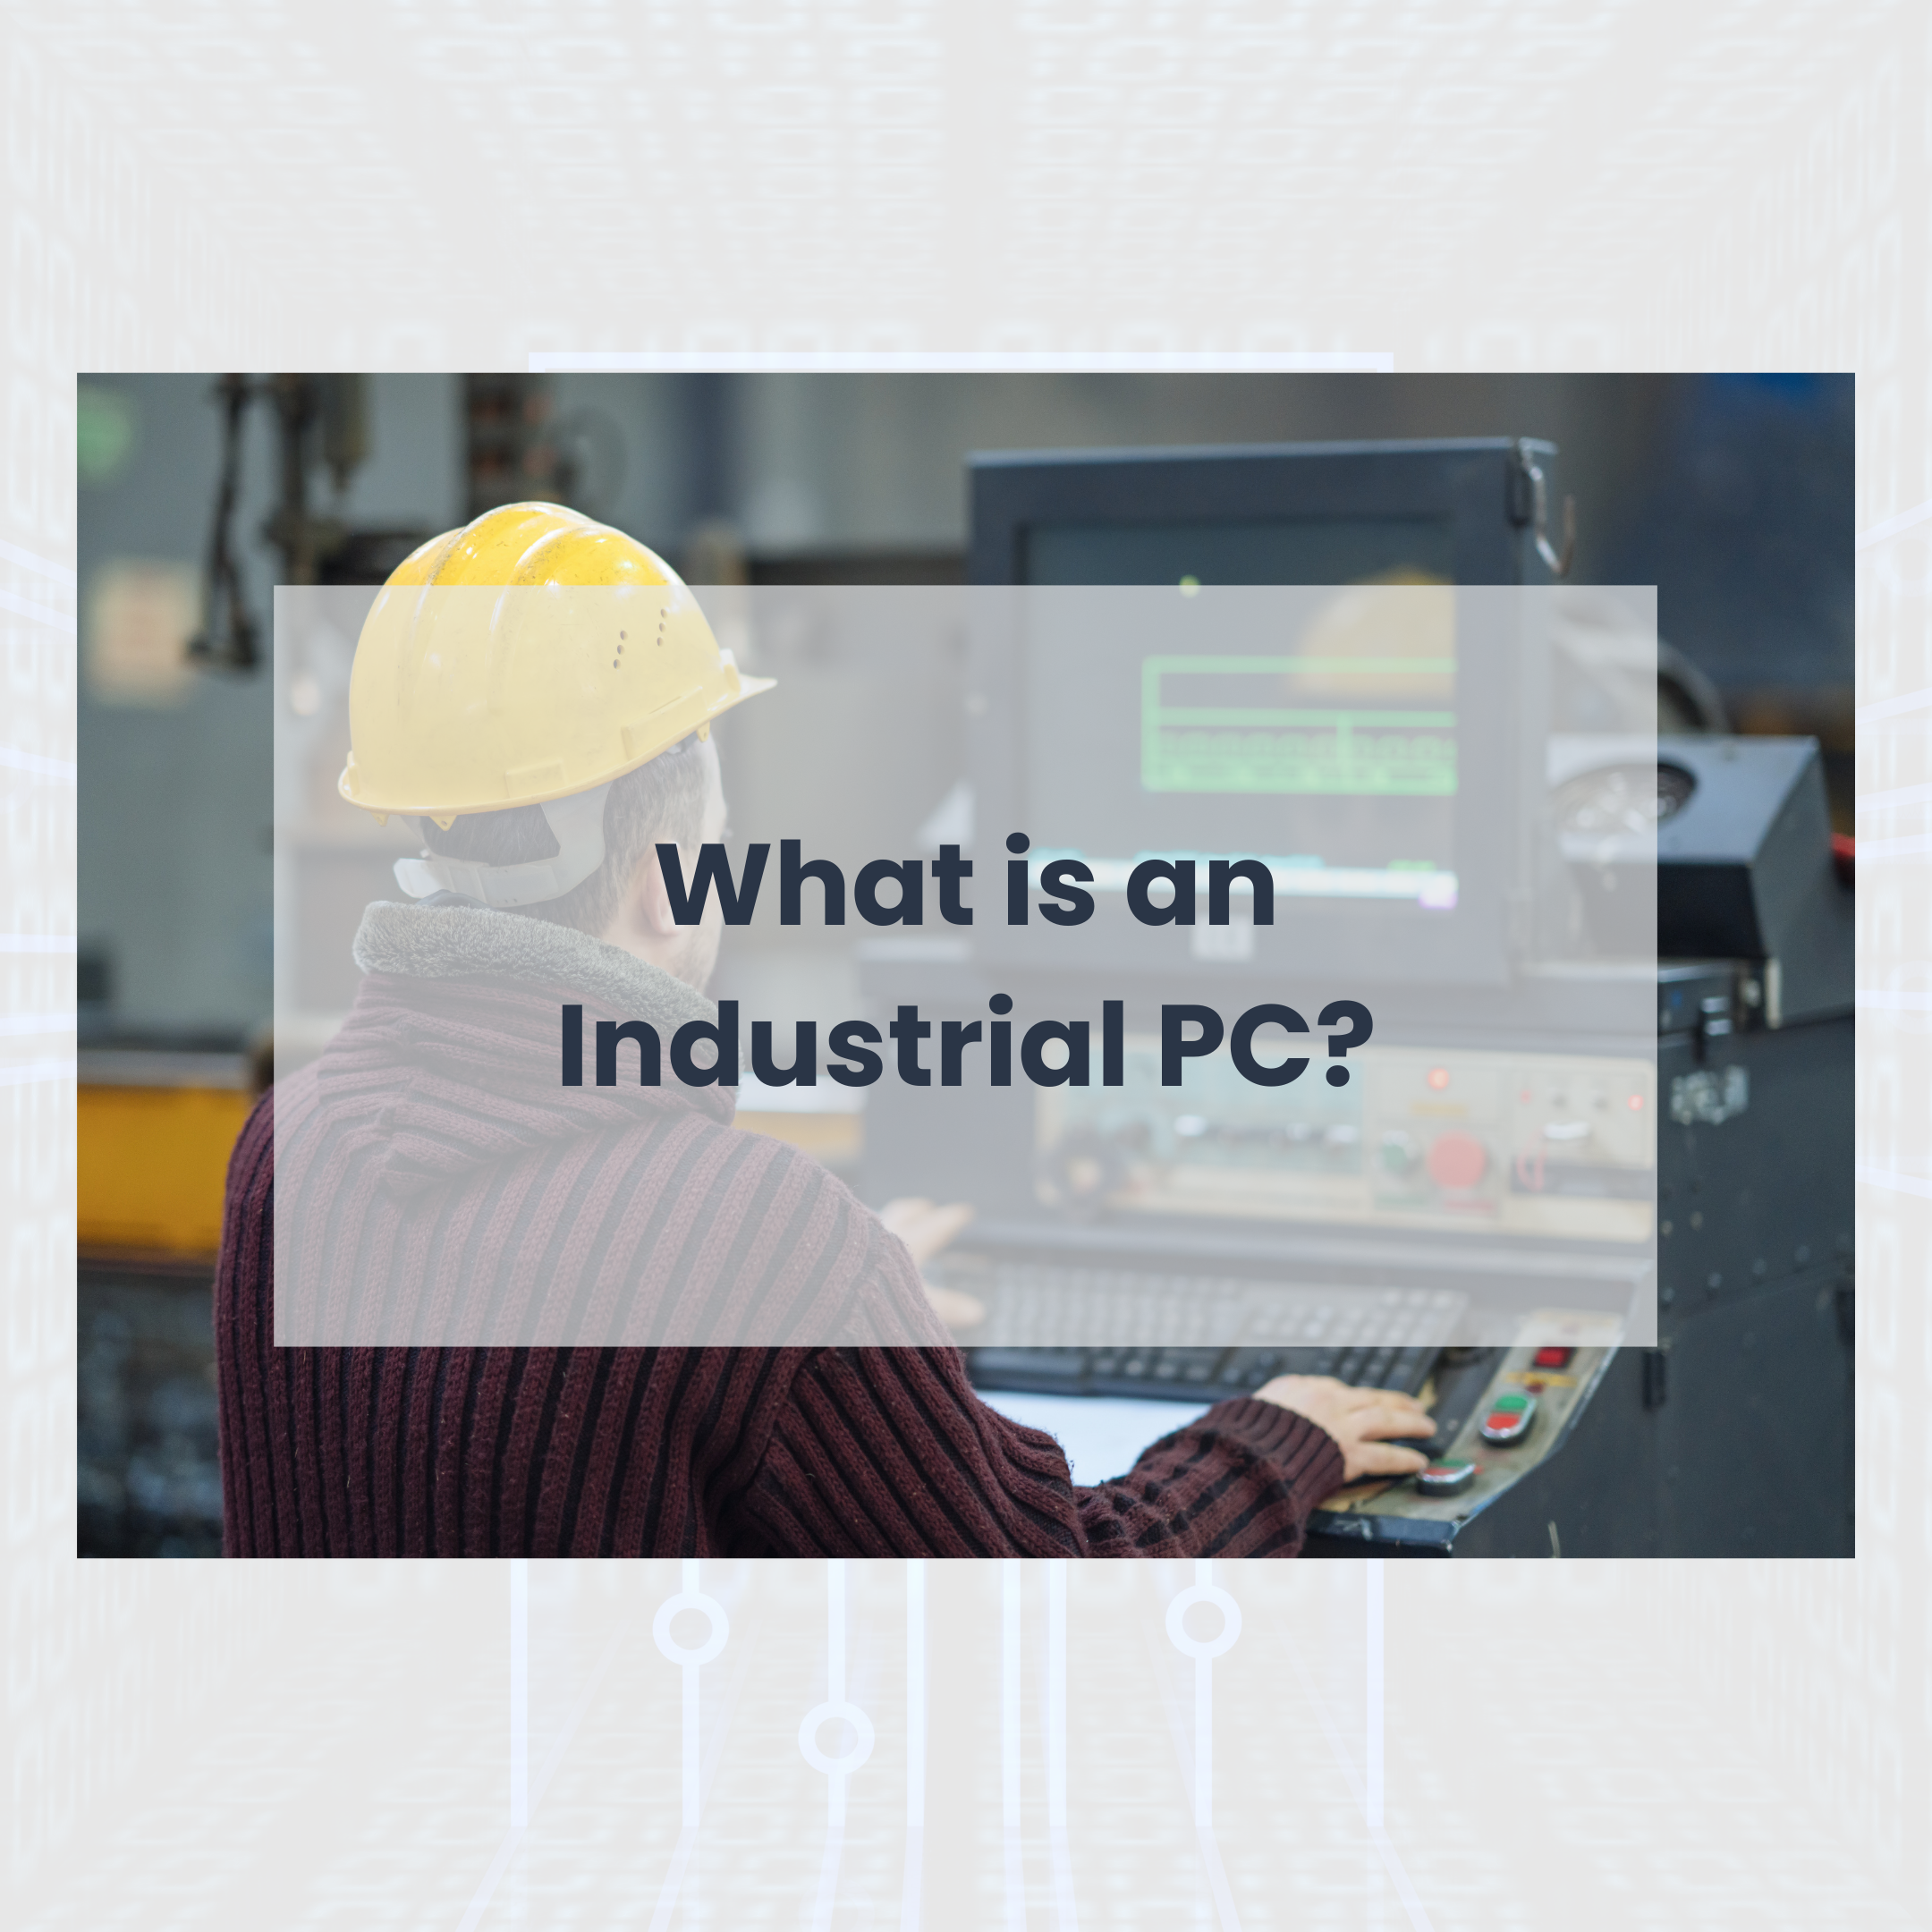 What is an Industrial PC?